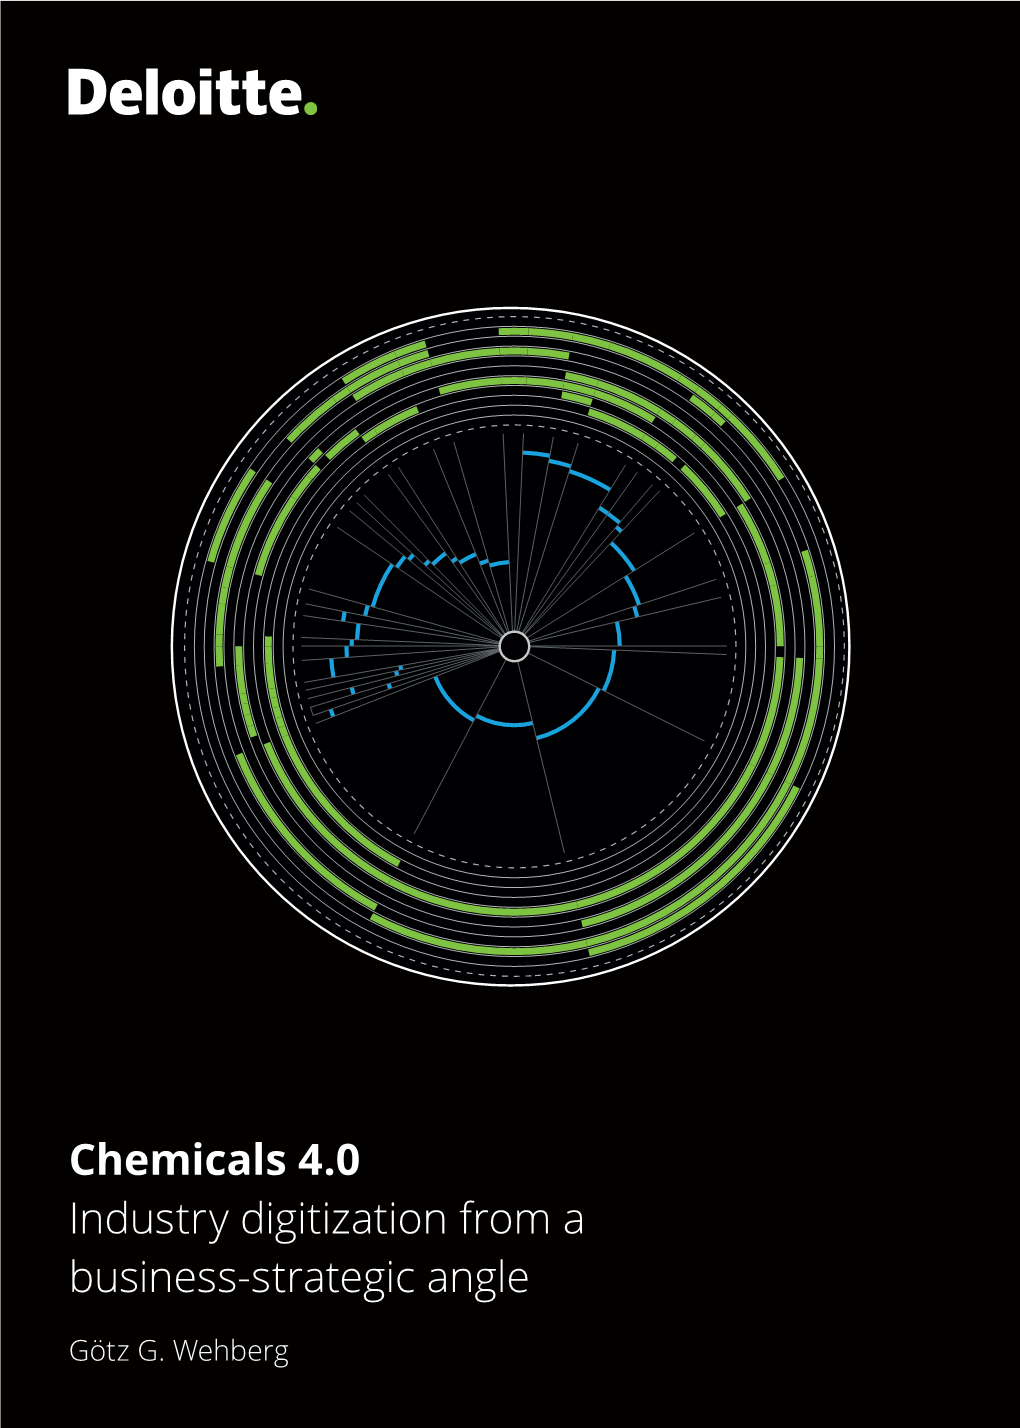 Chemicals 4.0 Industry Digitization from a Business-Strategic Angle